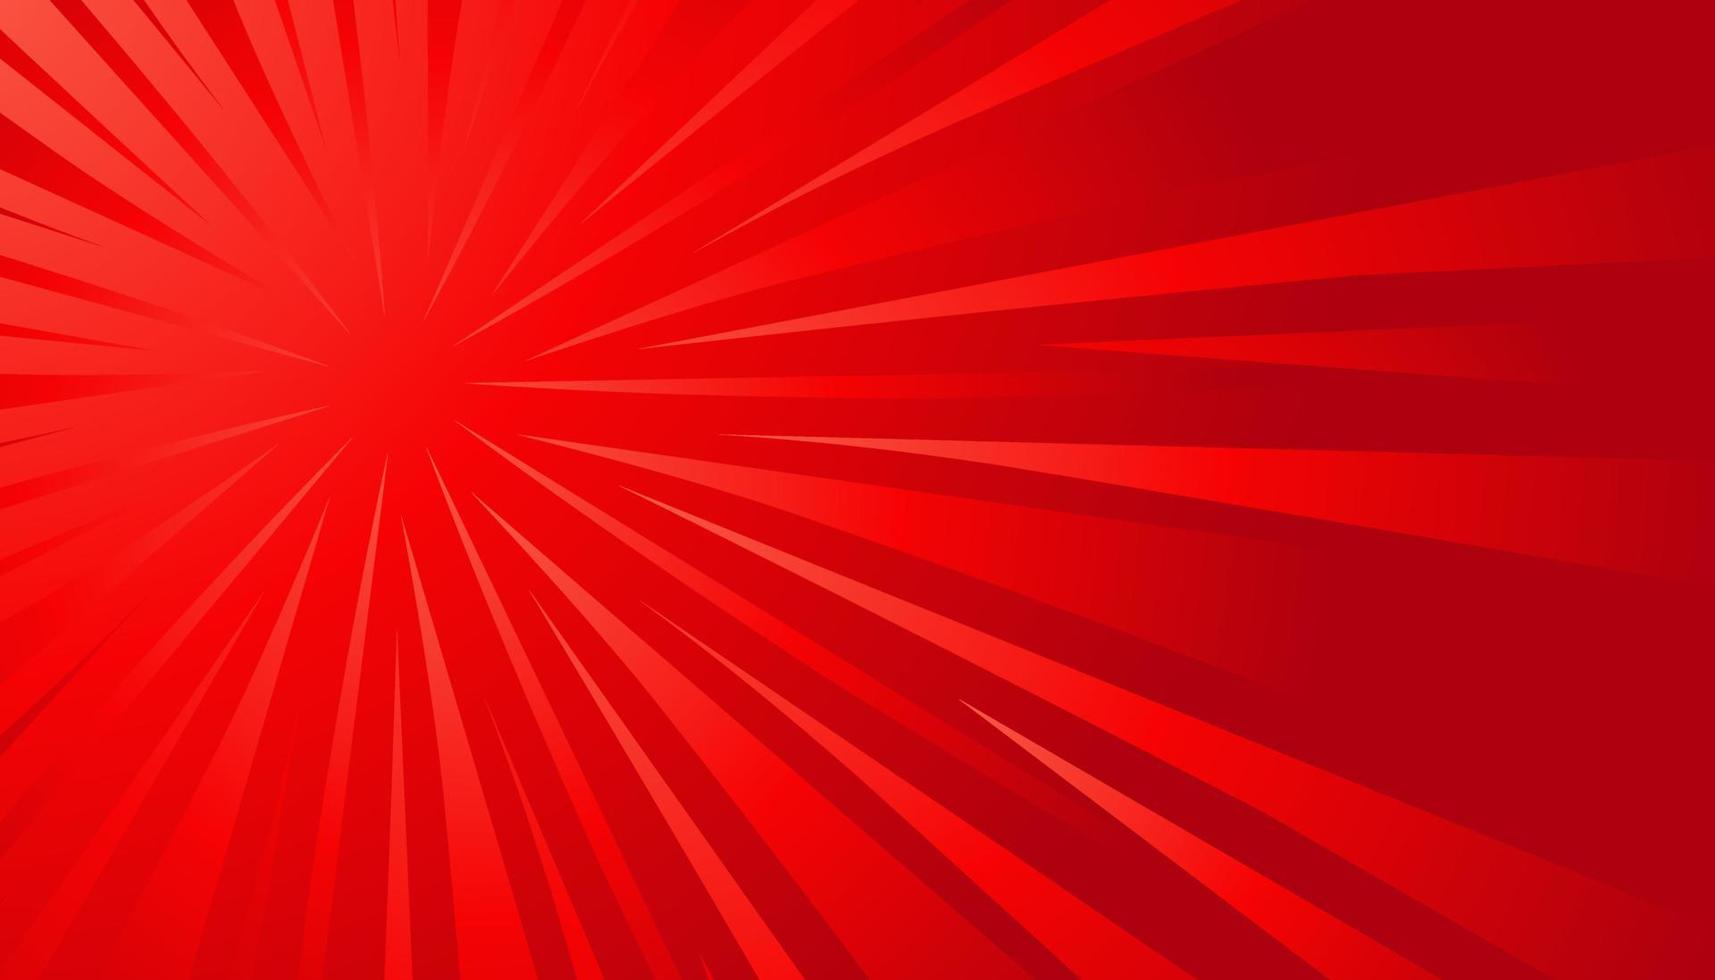 Red gradient color comic background design suitable for comics, poster designs, invitations, greeting cards and more vector